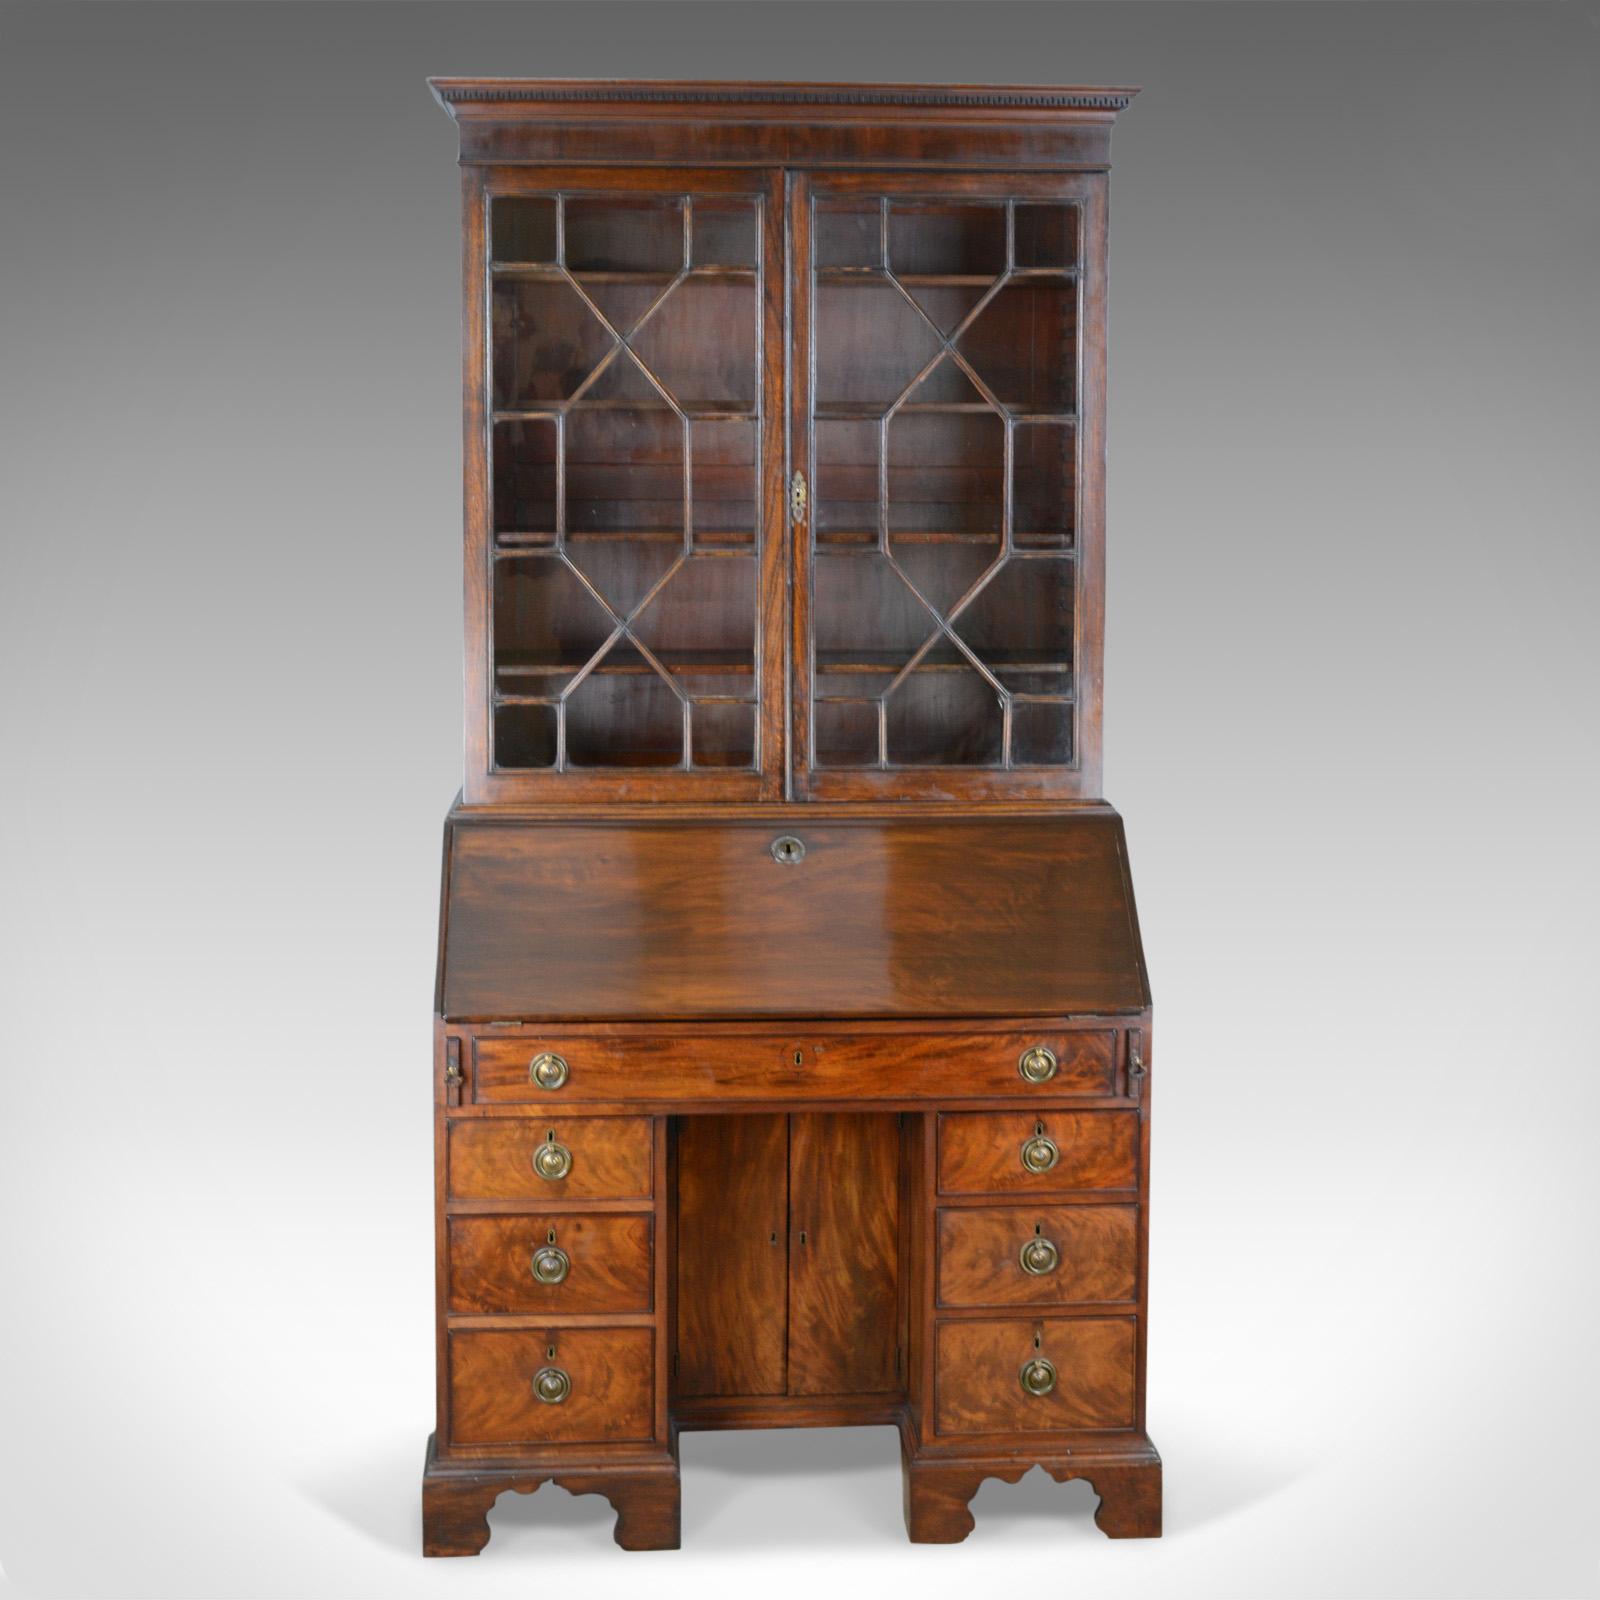 This is an antique bureau bookcase, an English, Georgian, mahogany cabinet dating to the late 18th century, circa 1800.

Classic glazed display cabinet over a practical writing bureau 
Generous in size offering storage and display or bookshelf